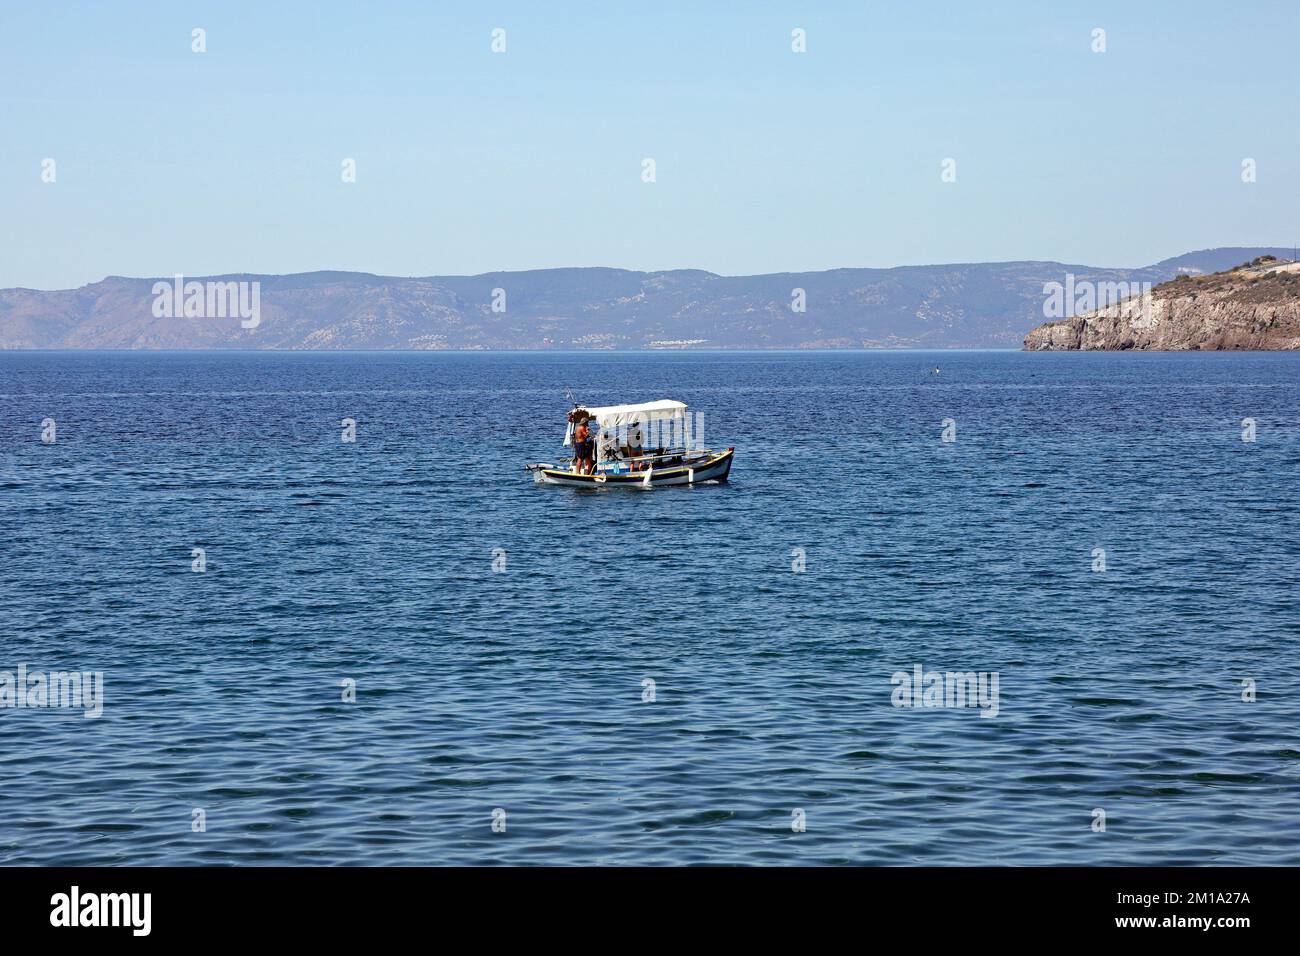 Lesbos scenes. Small fishing boat with family aboard, low in the water September / October 2022. Stock Photo